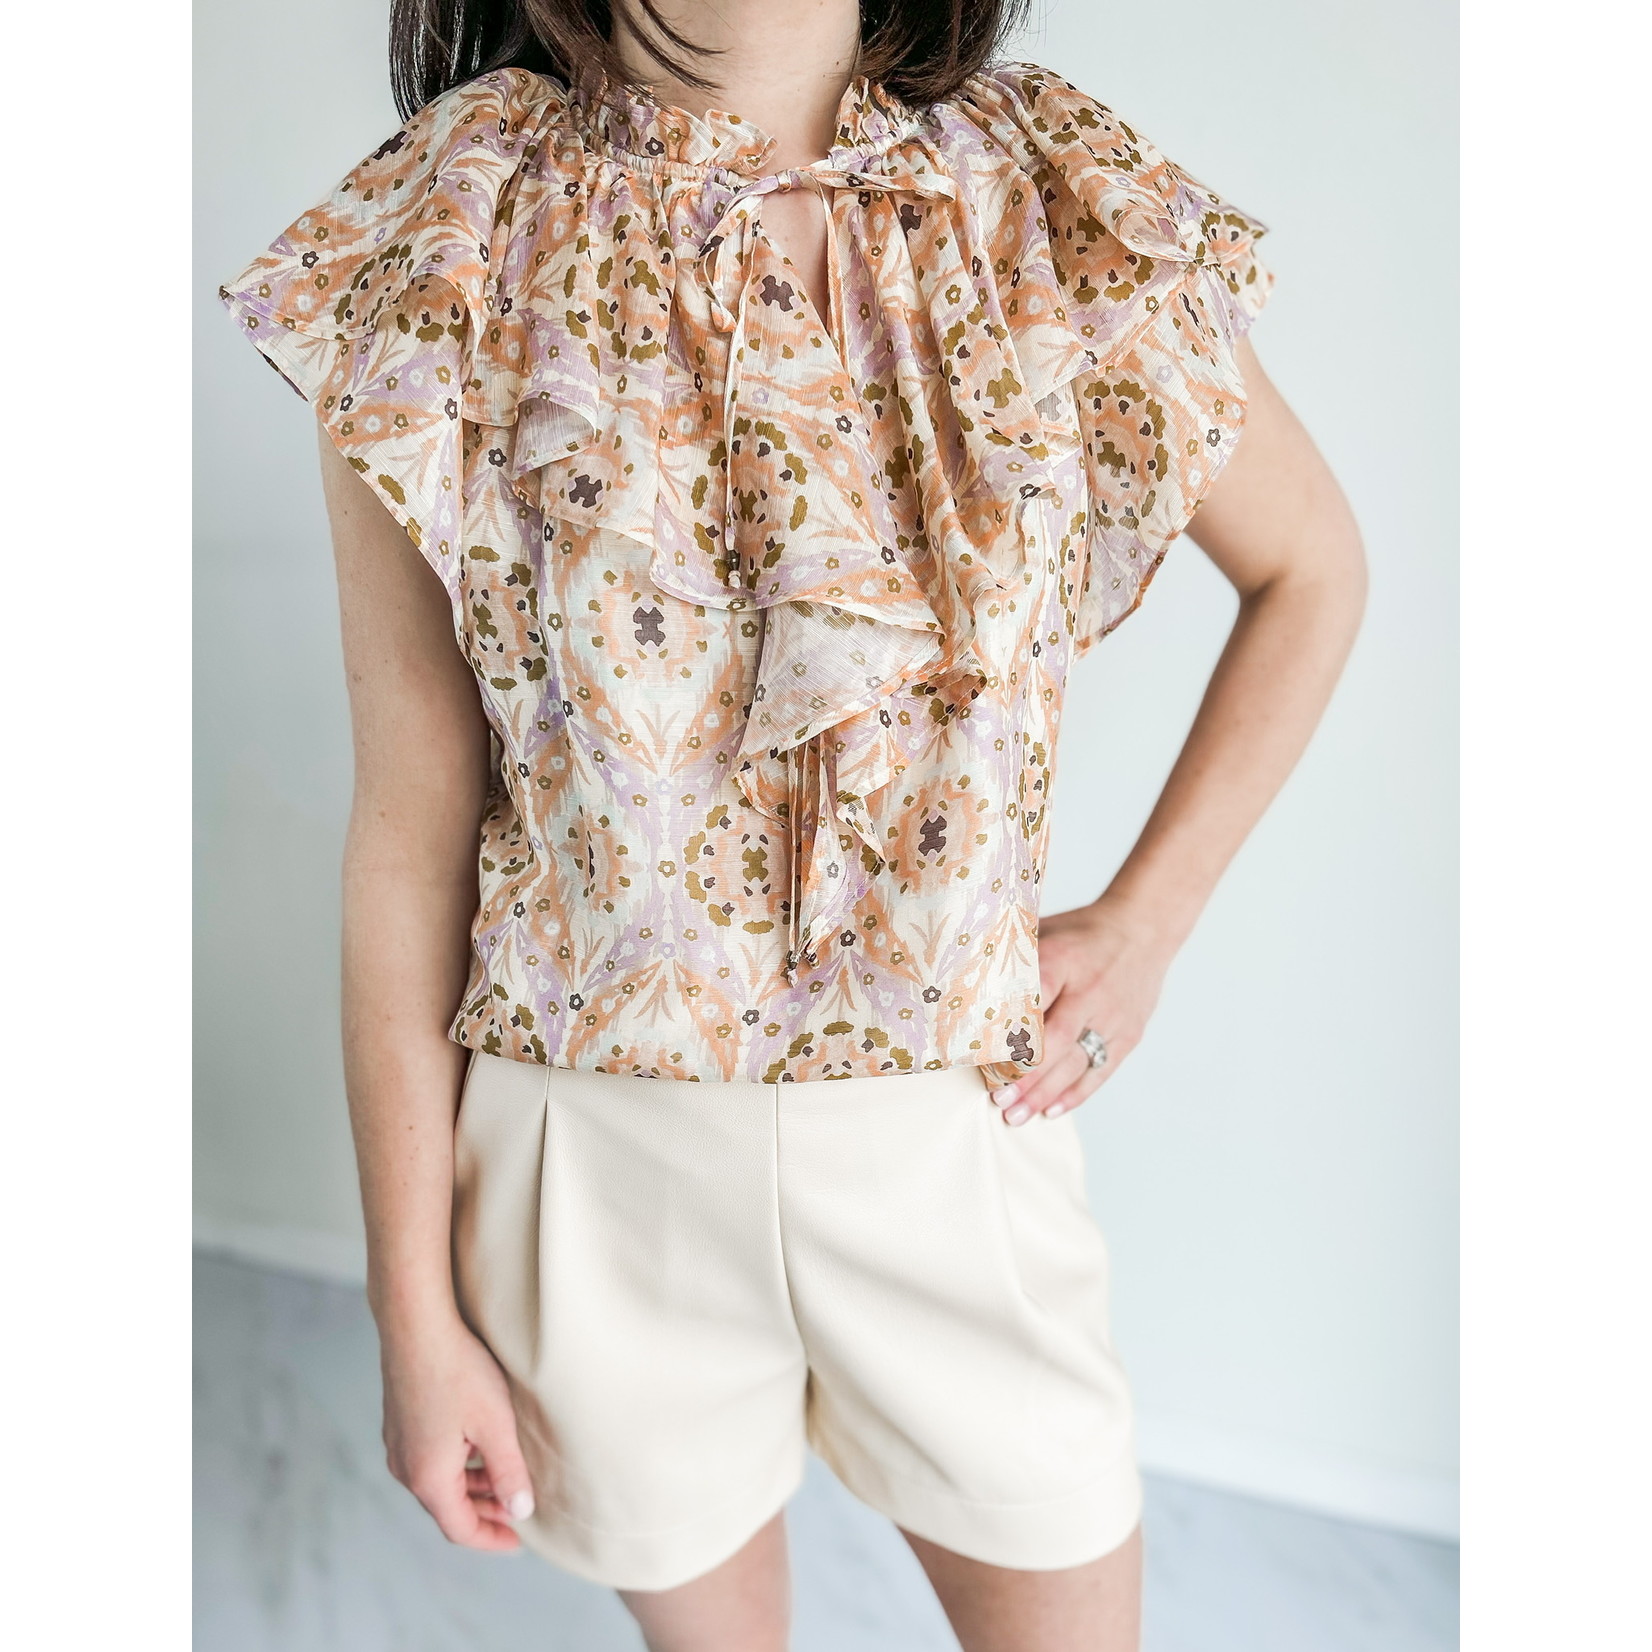 Marie Oliver Aria Blouse